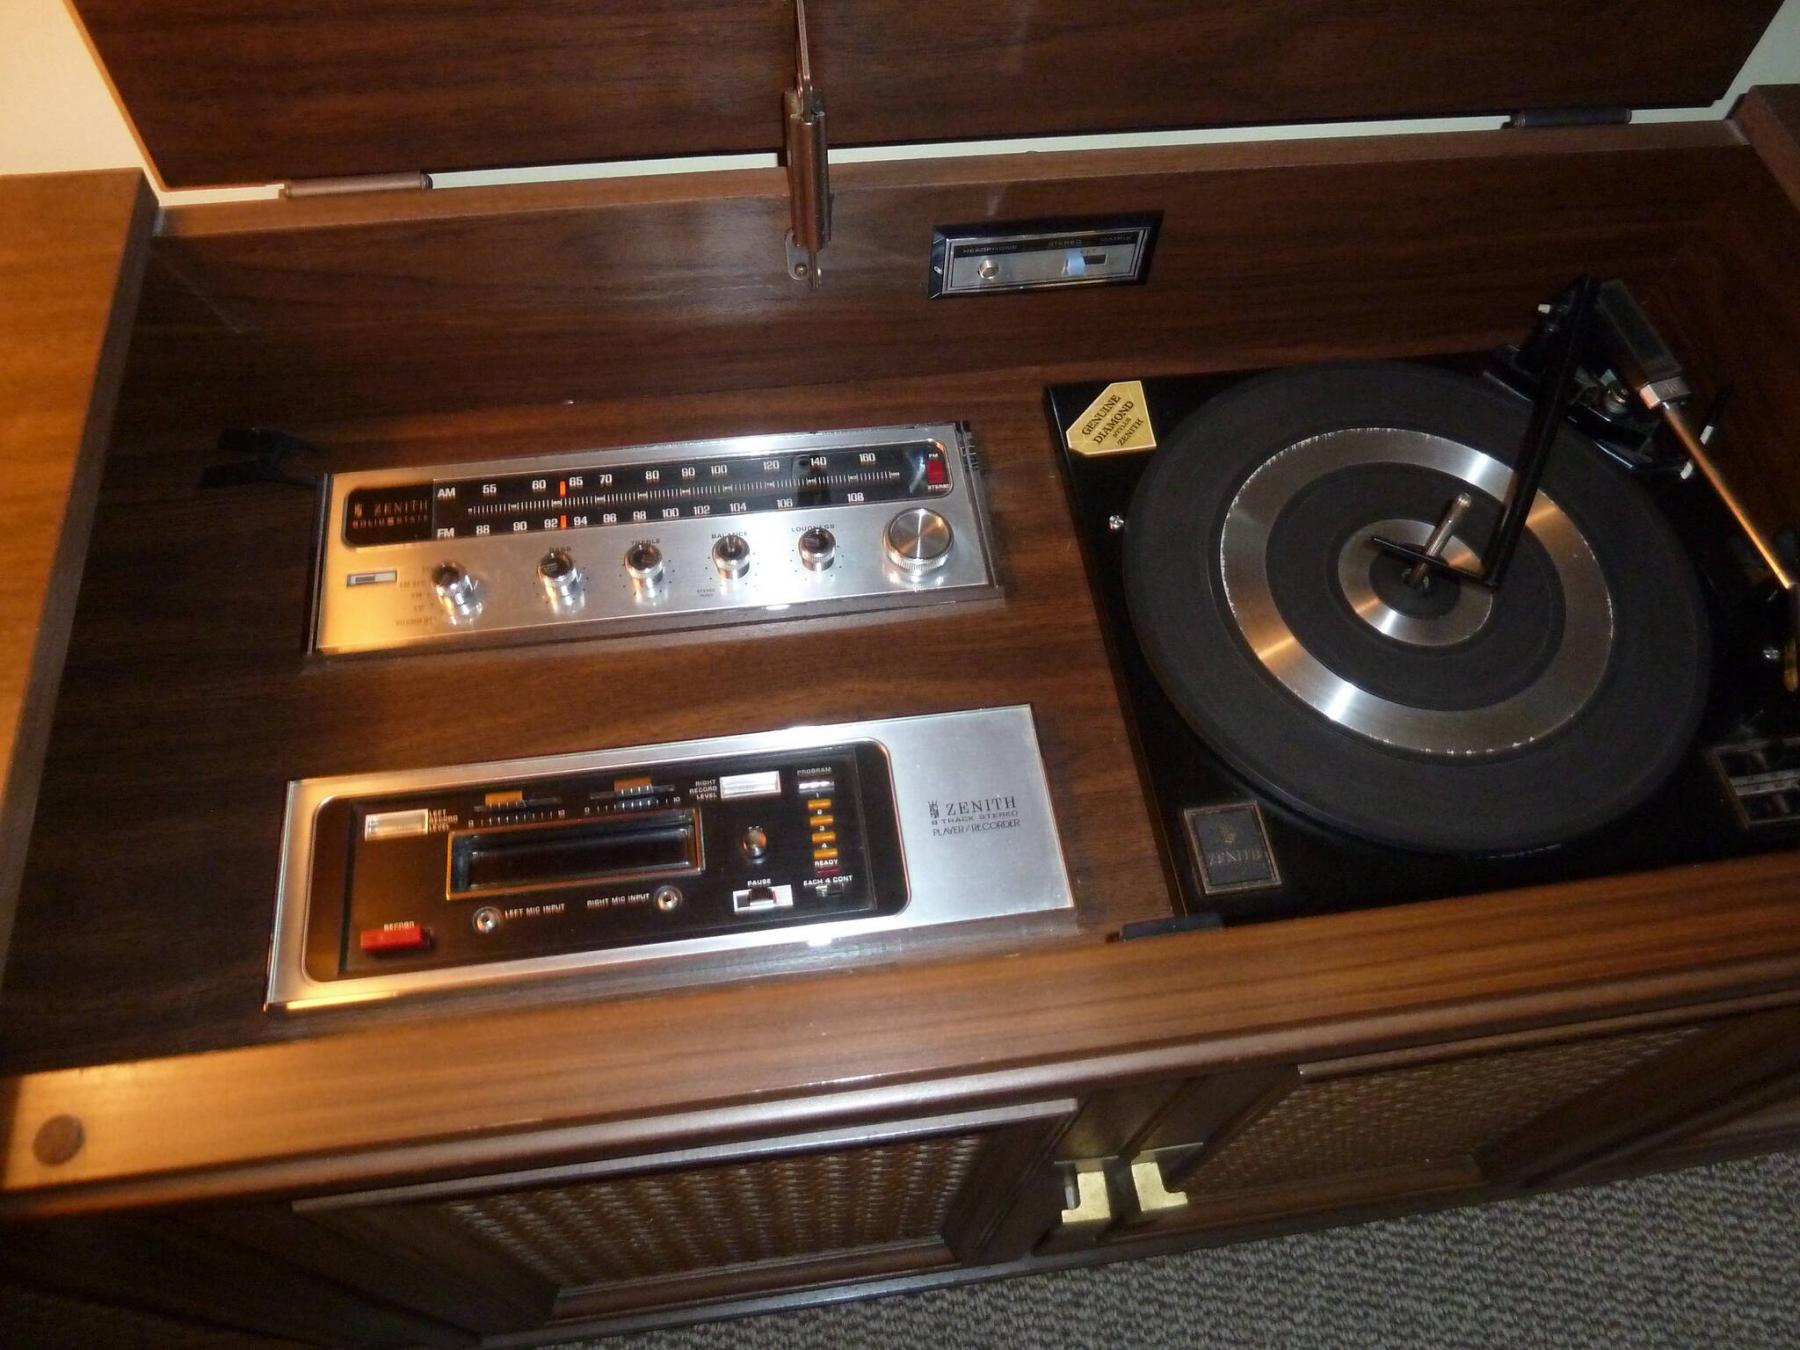 <p>Photos by Laurie Mustard / Winnipeg Free Press</p><p>This vintage stereo even features an 8-track player â but it needs professional help.</p>